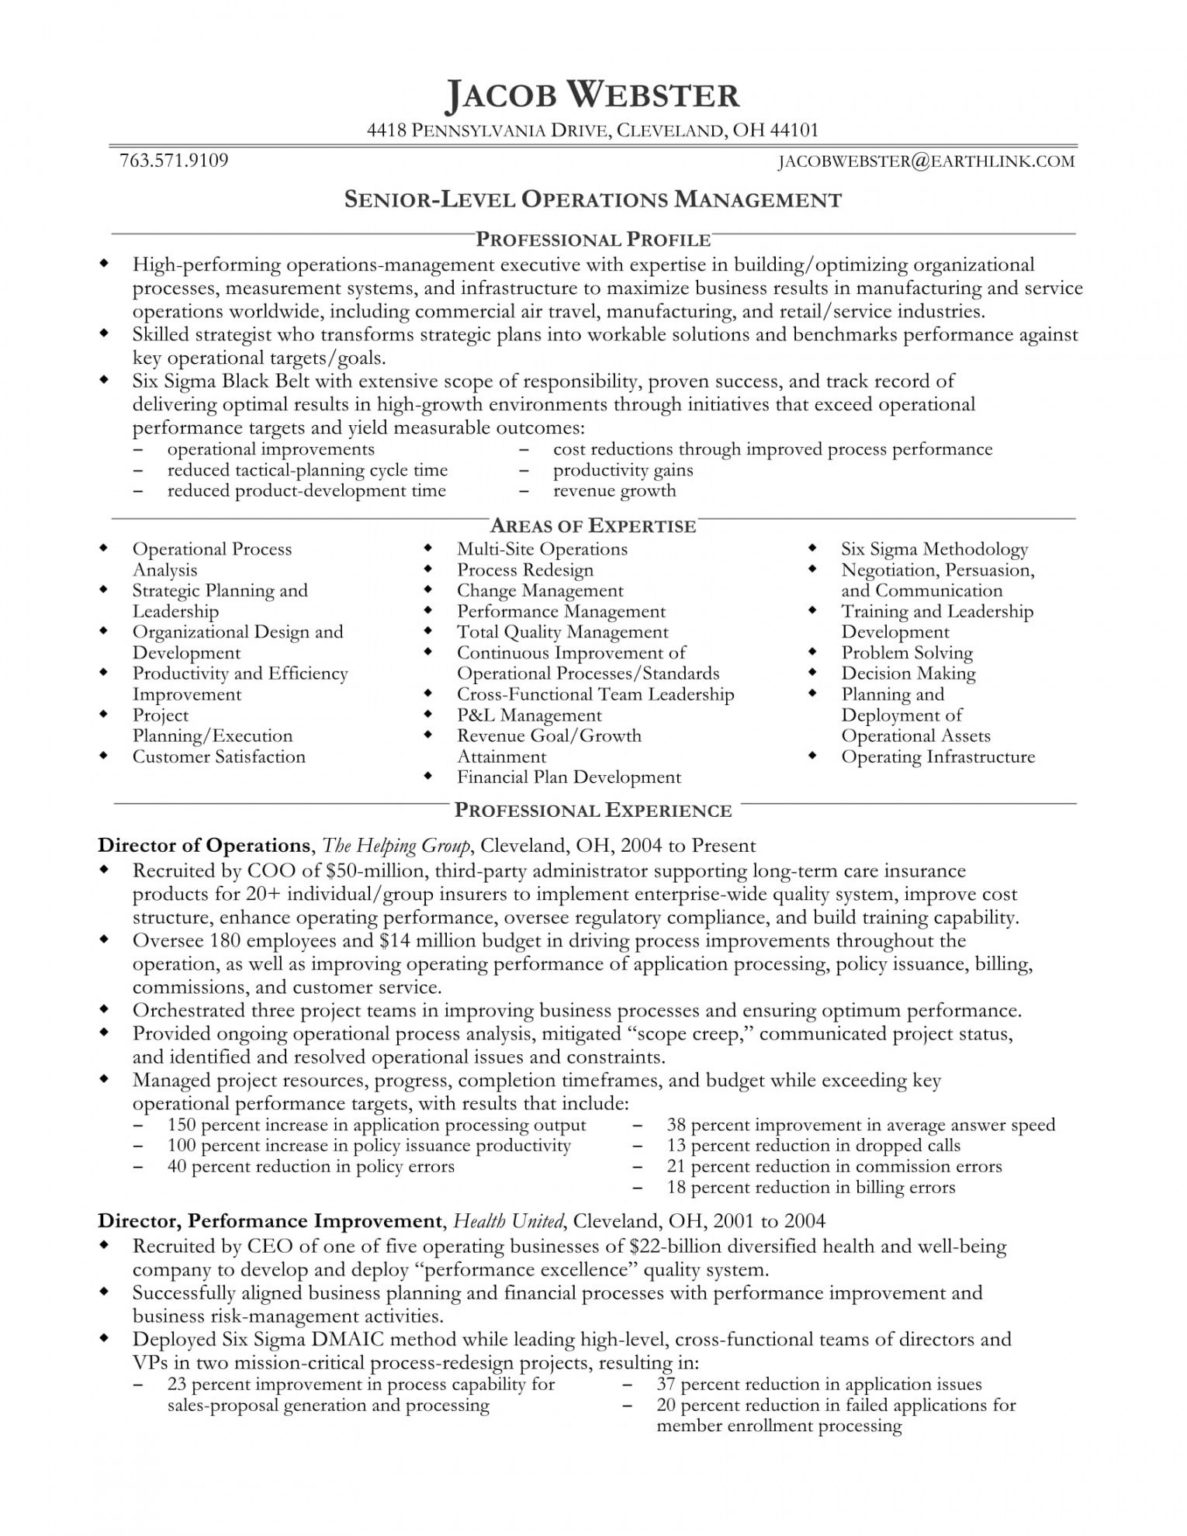 professional resume writing services for executives